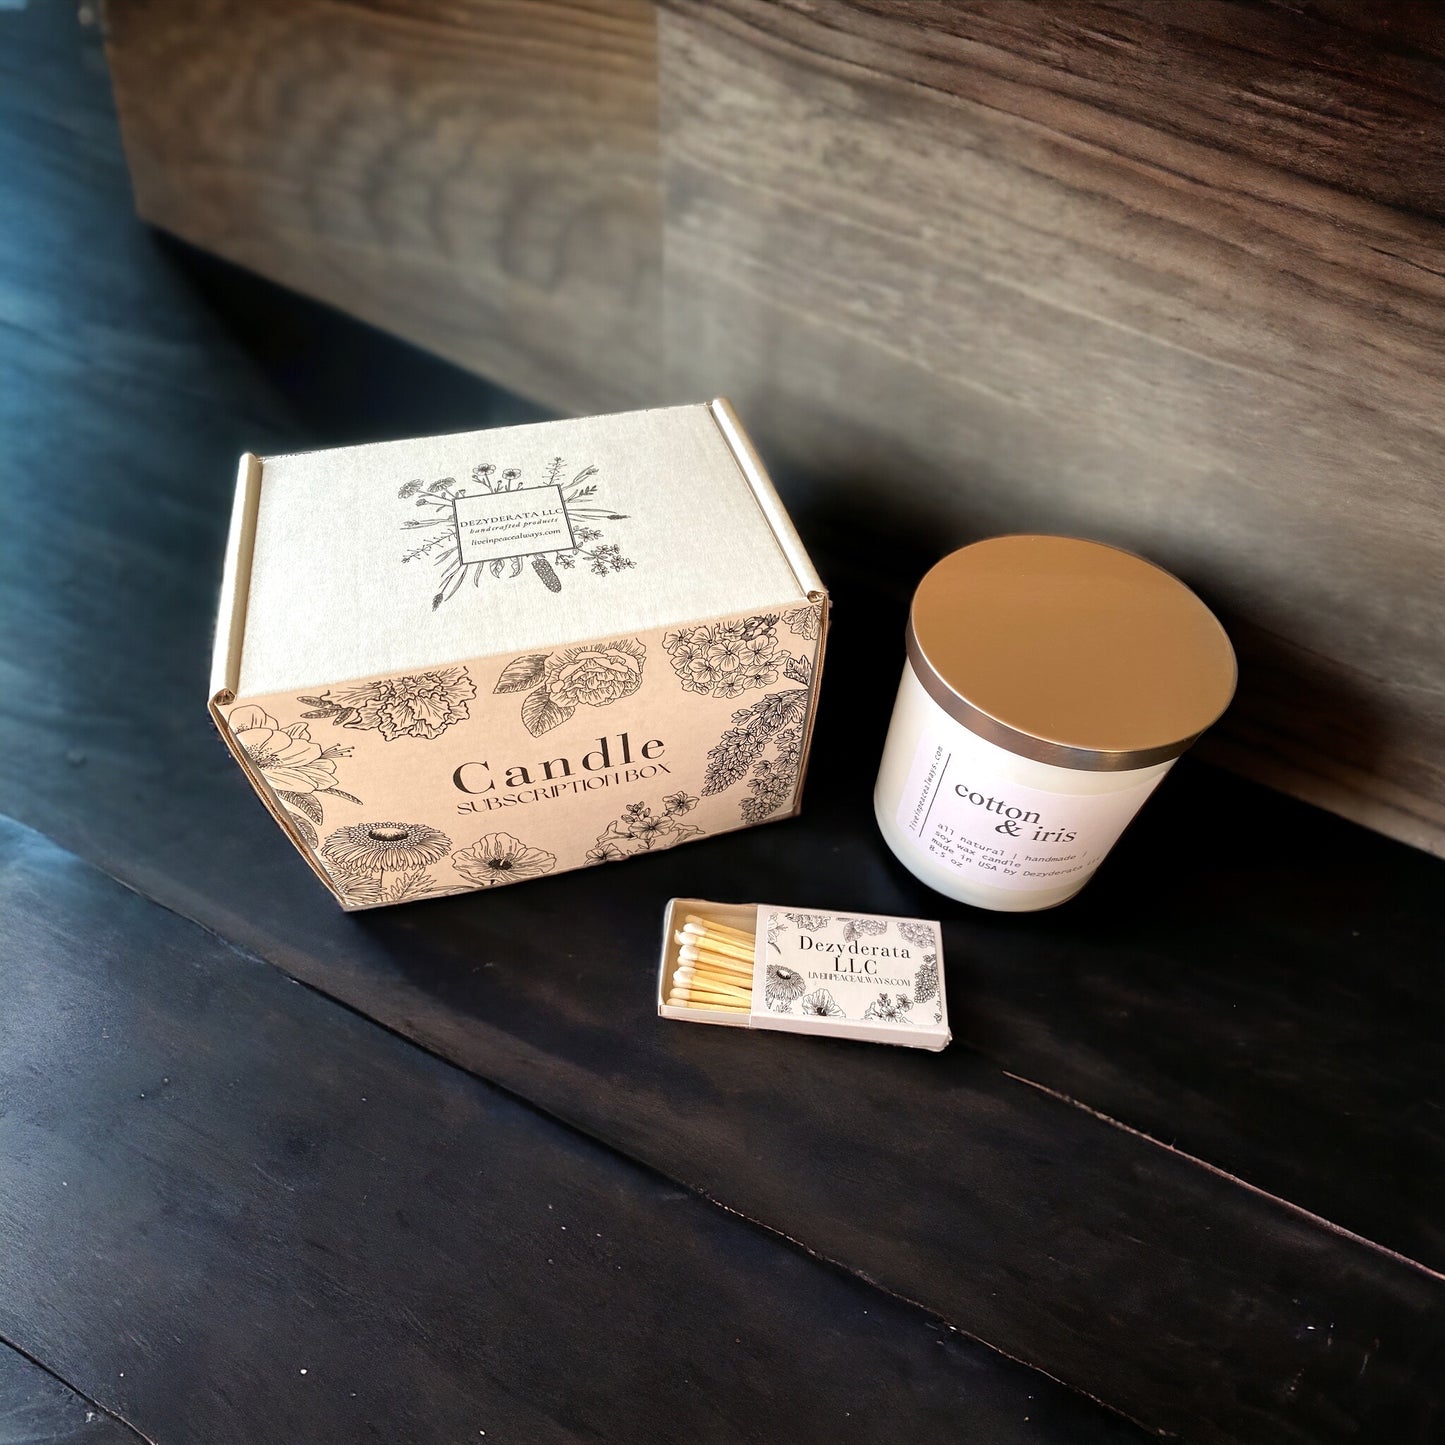 Candles, Candle Subscription Box